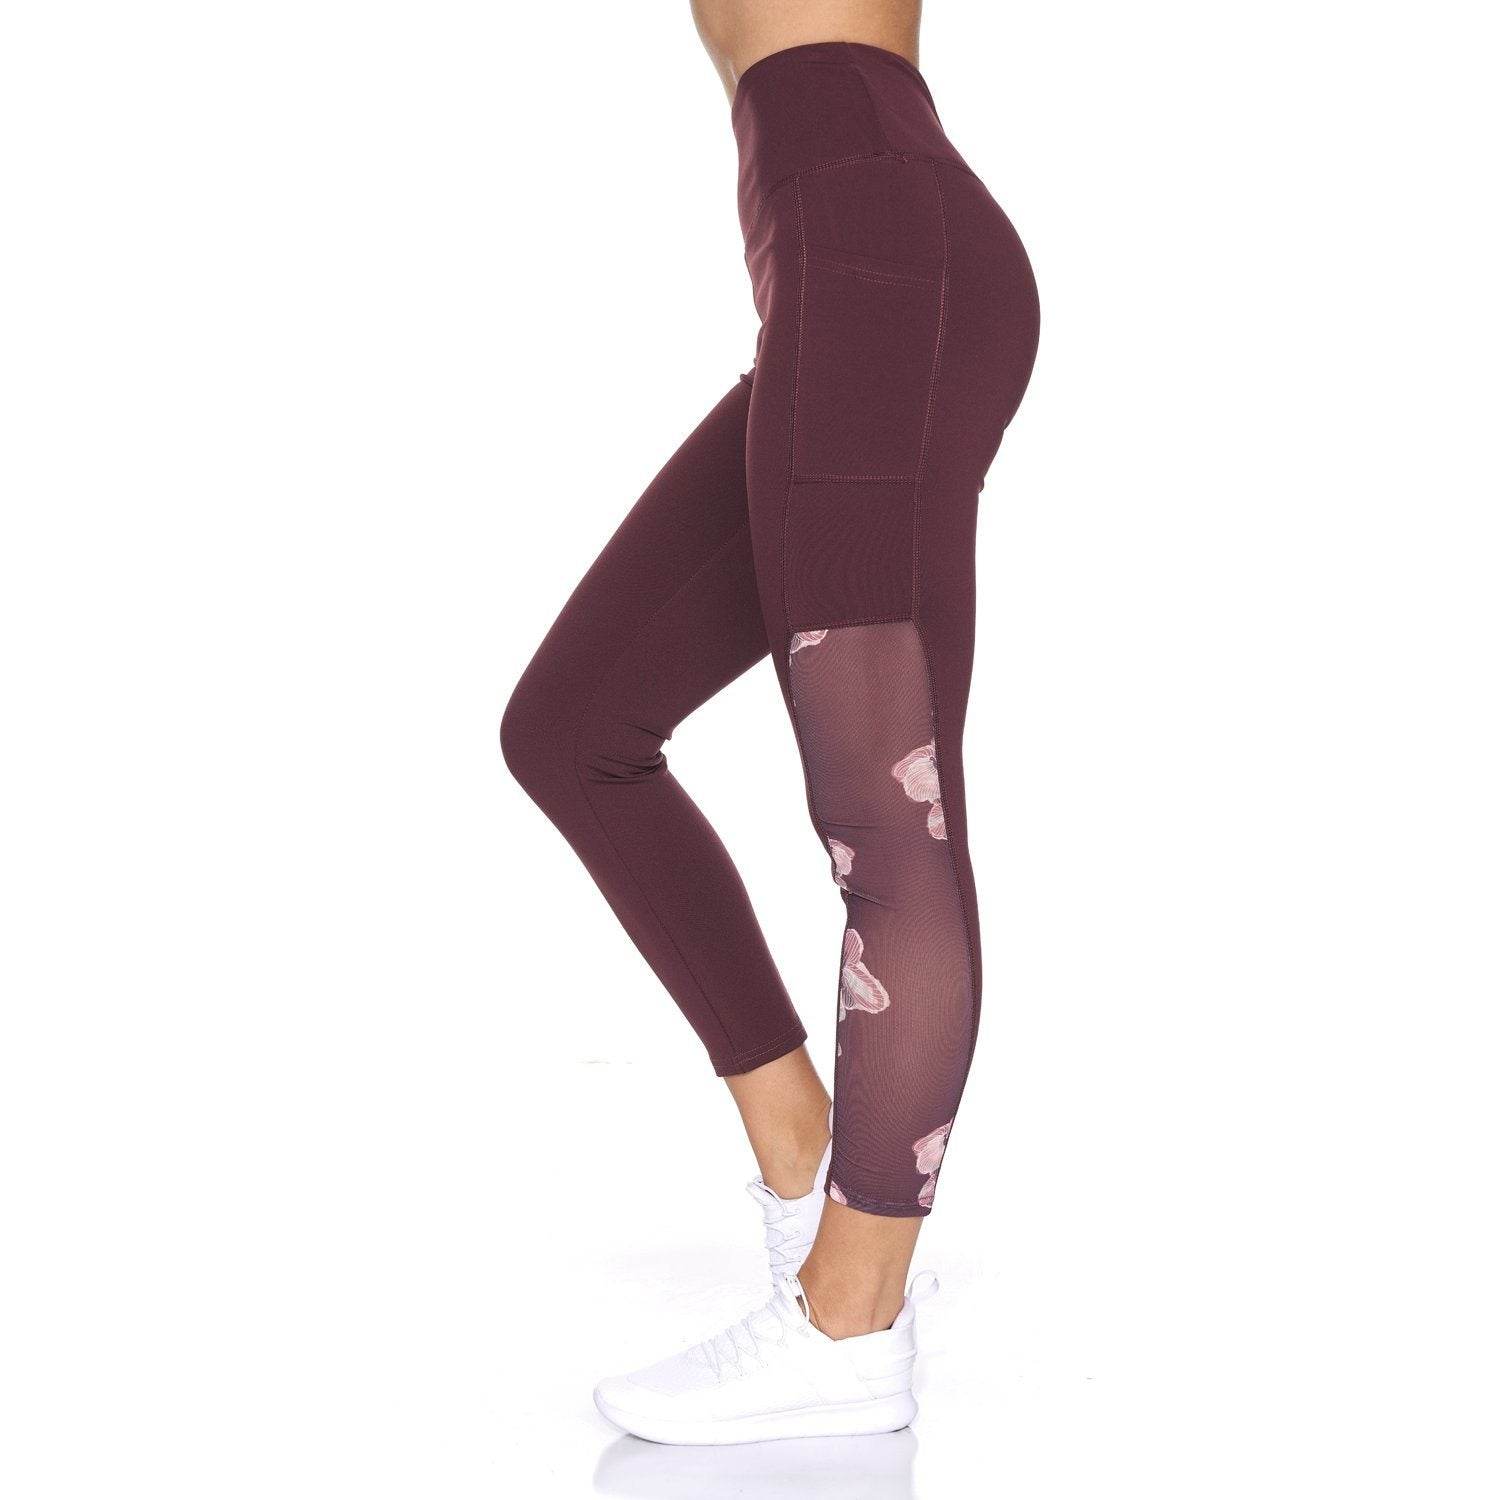 Women's 7/8 Active Leggings with Sheer Mesh Floral Panel and Pockets